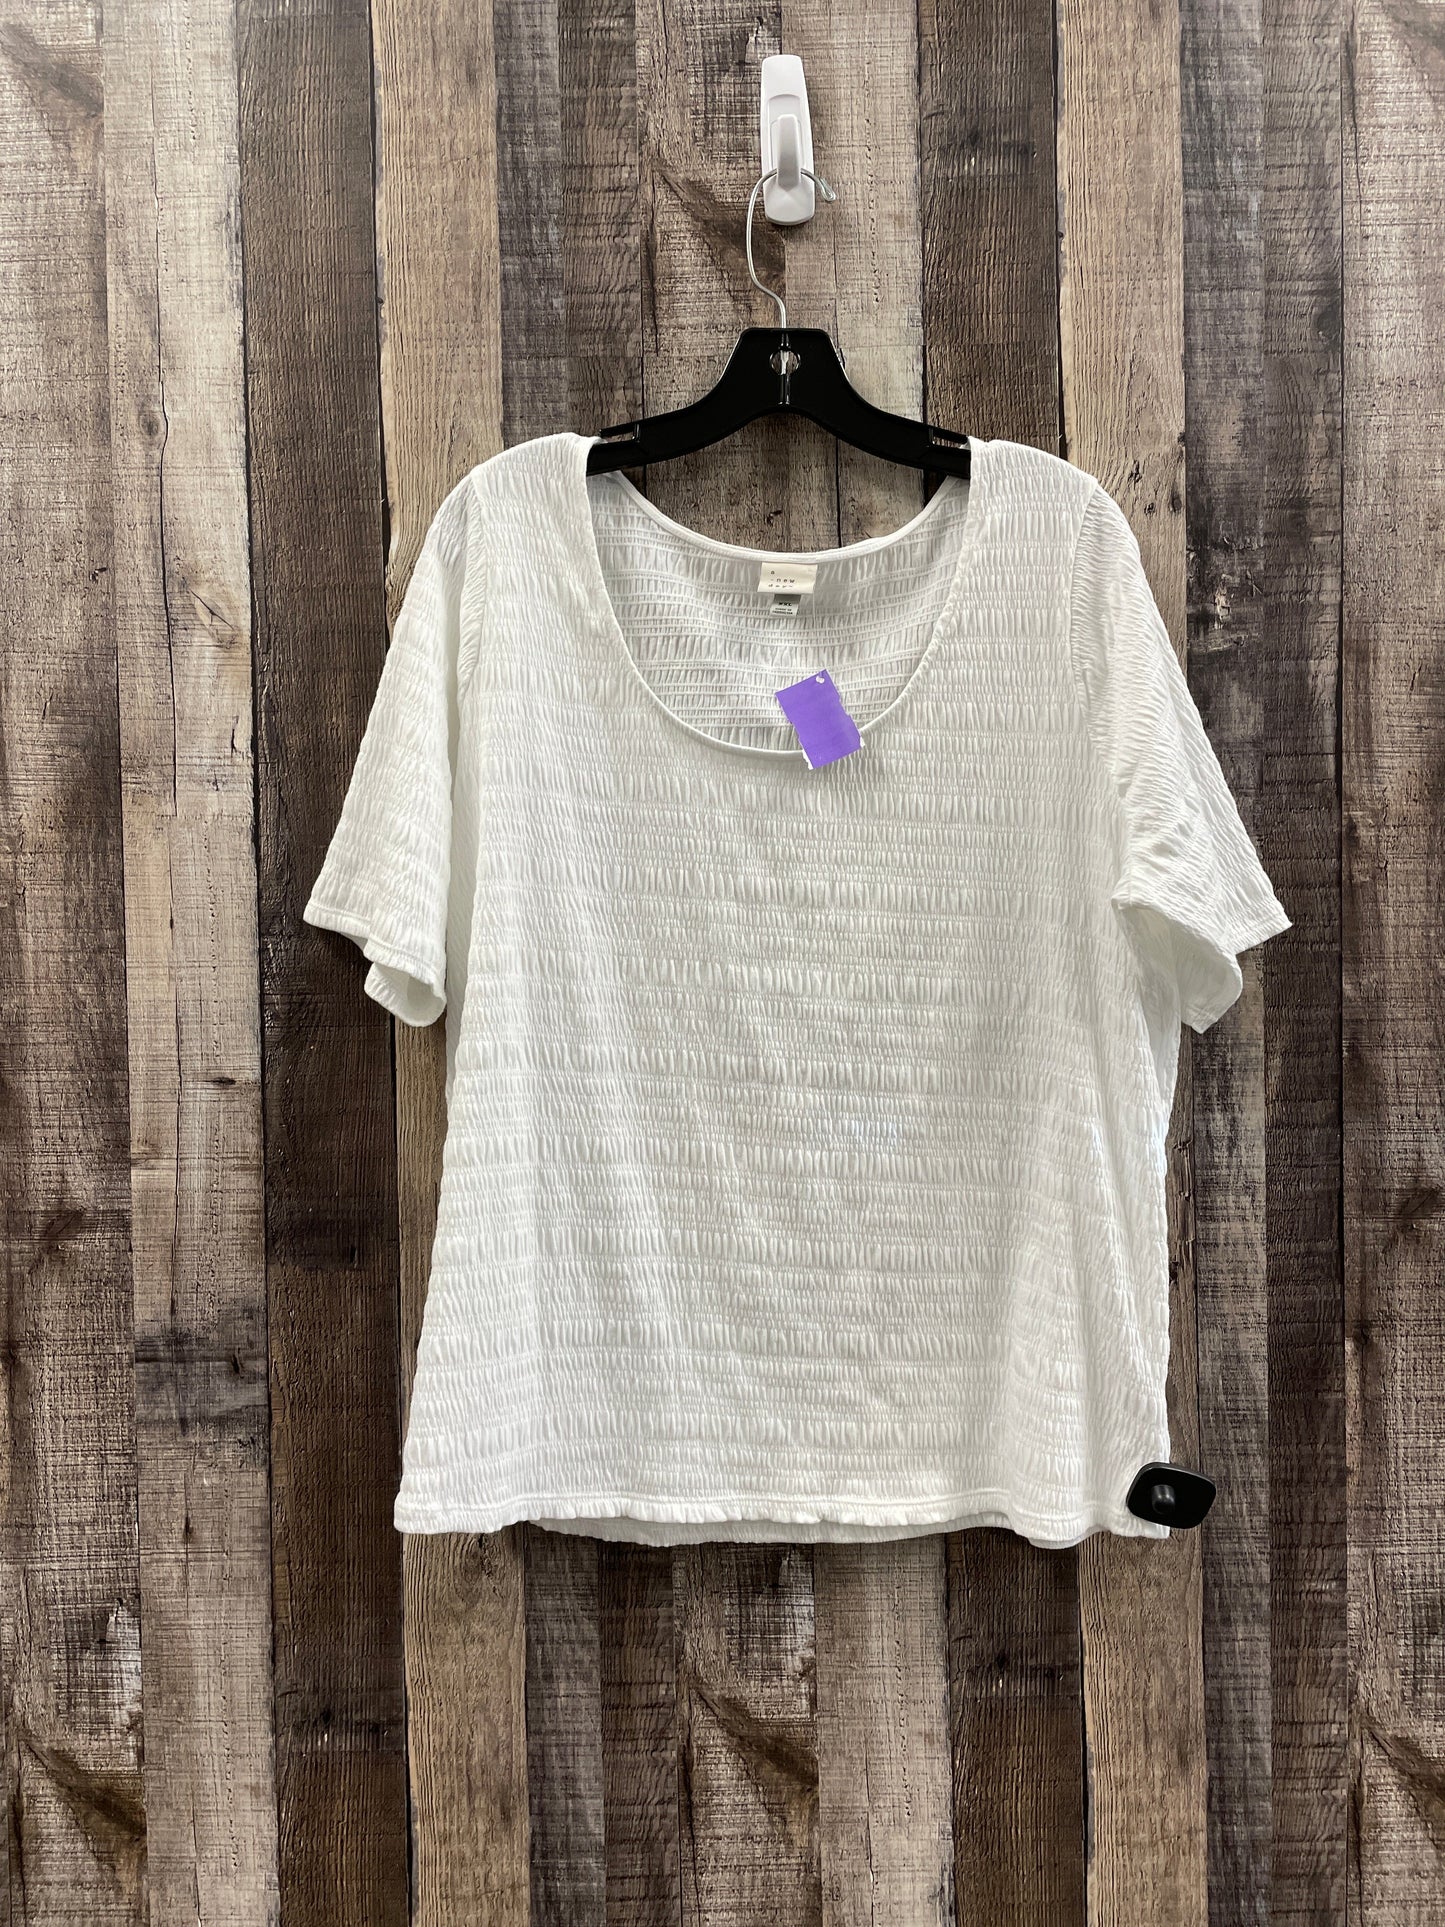 White Top Short Sleeve A New Day, Size Xxxl